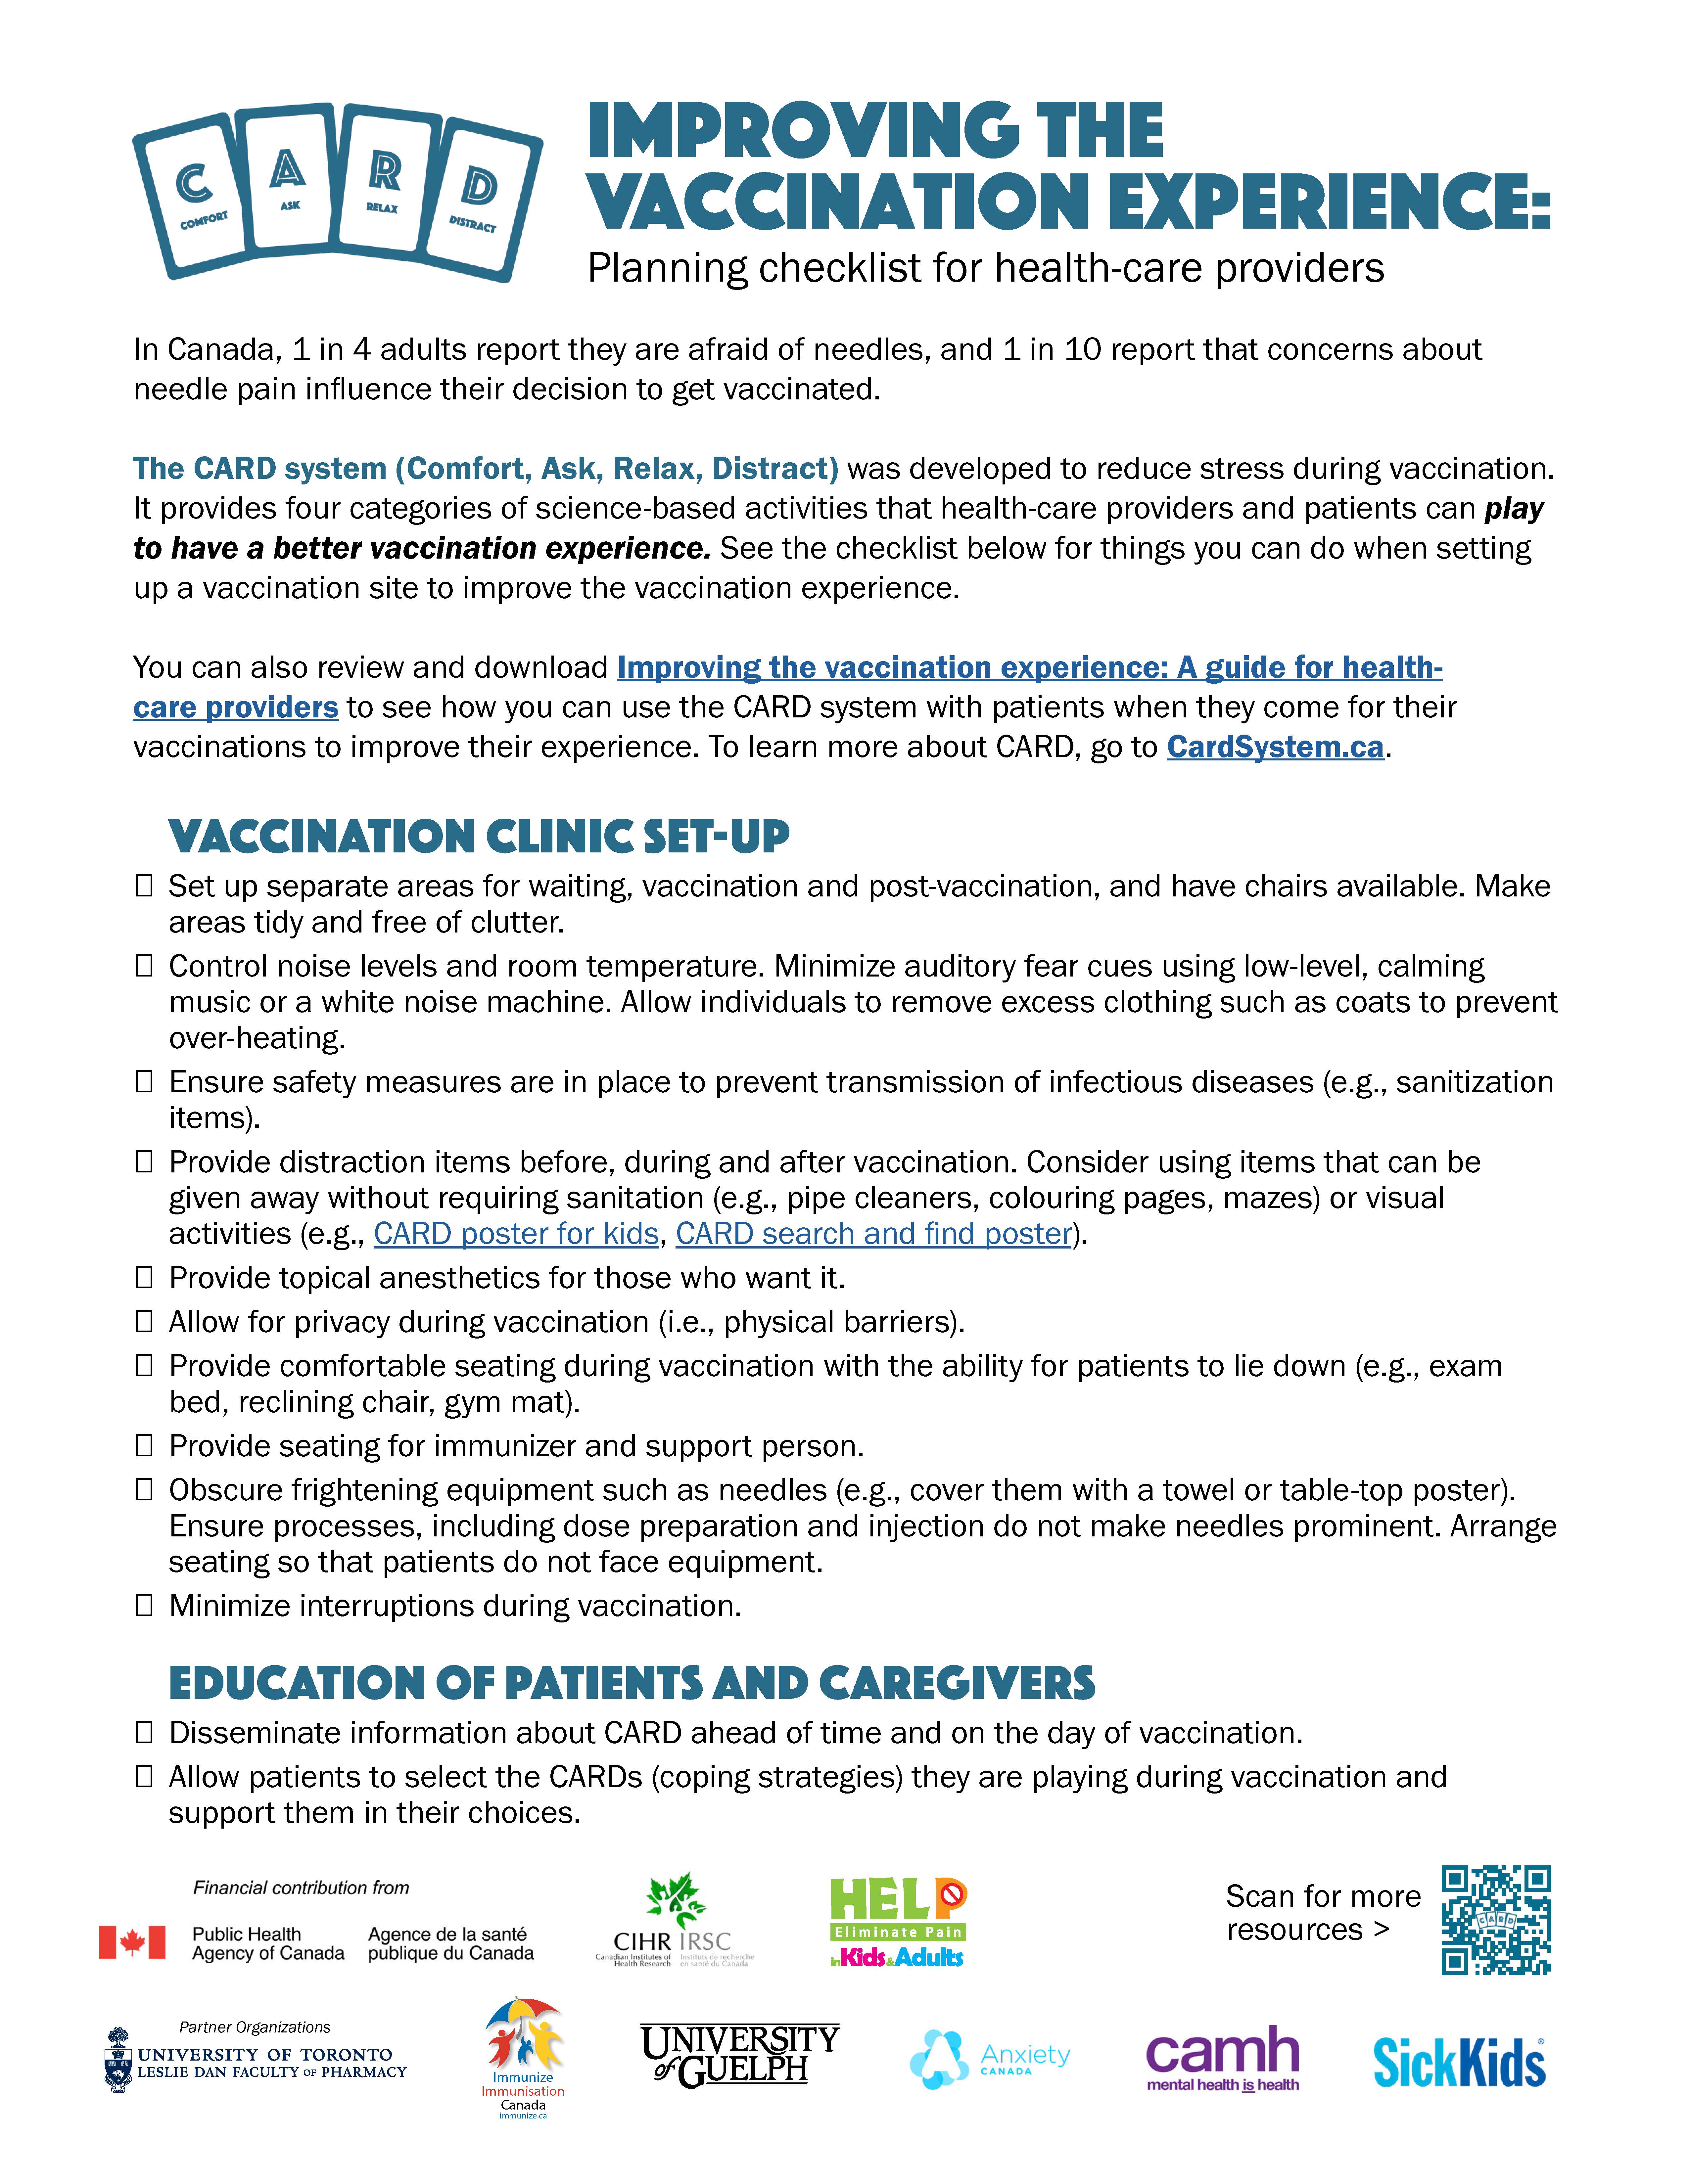 Improving the vaccination experience: Planning checklist for health-care providers